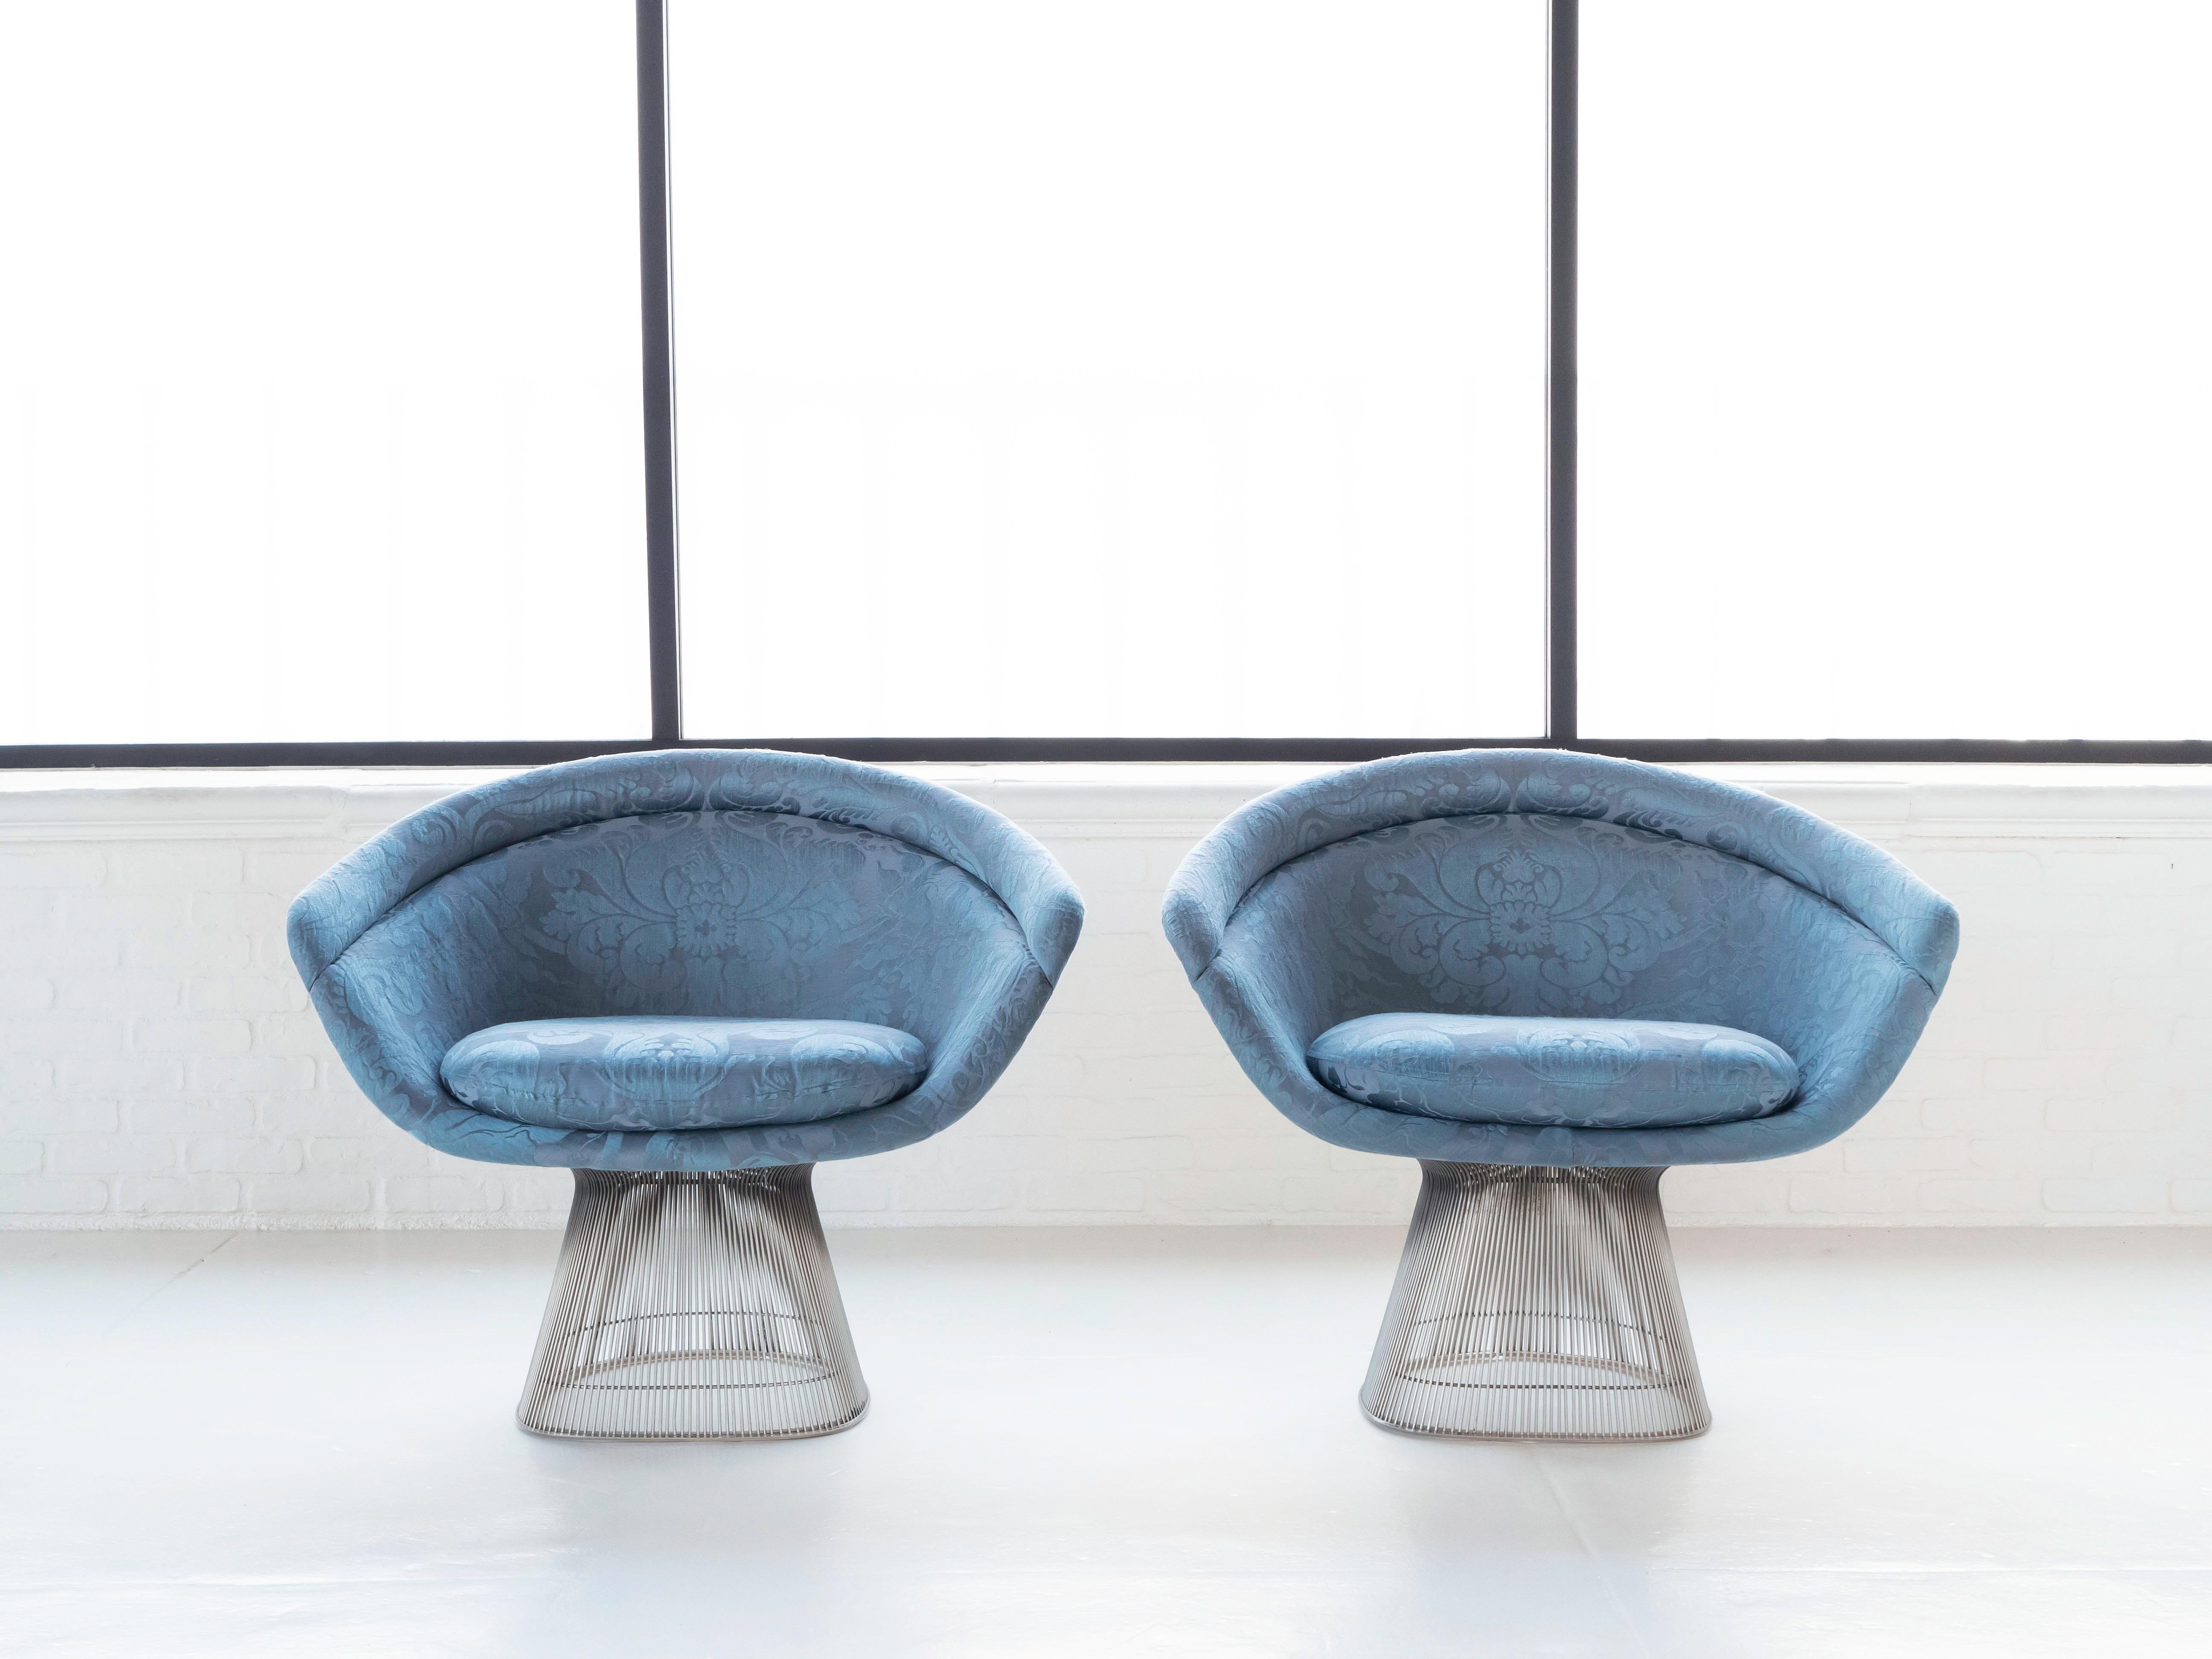 Warren Platner Model No. 1715 Nickel Plated Wire Frame Lounge Chairs designed for Knoll, 1960's/1970's

These iconic chairs have been reupholstered in this blue floral pattern at some point.  The fabric shows light wear and pilling, but no rips or